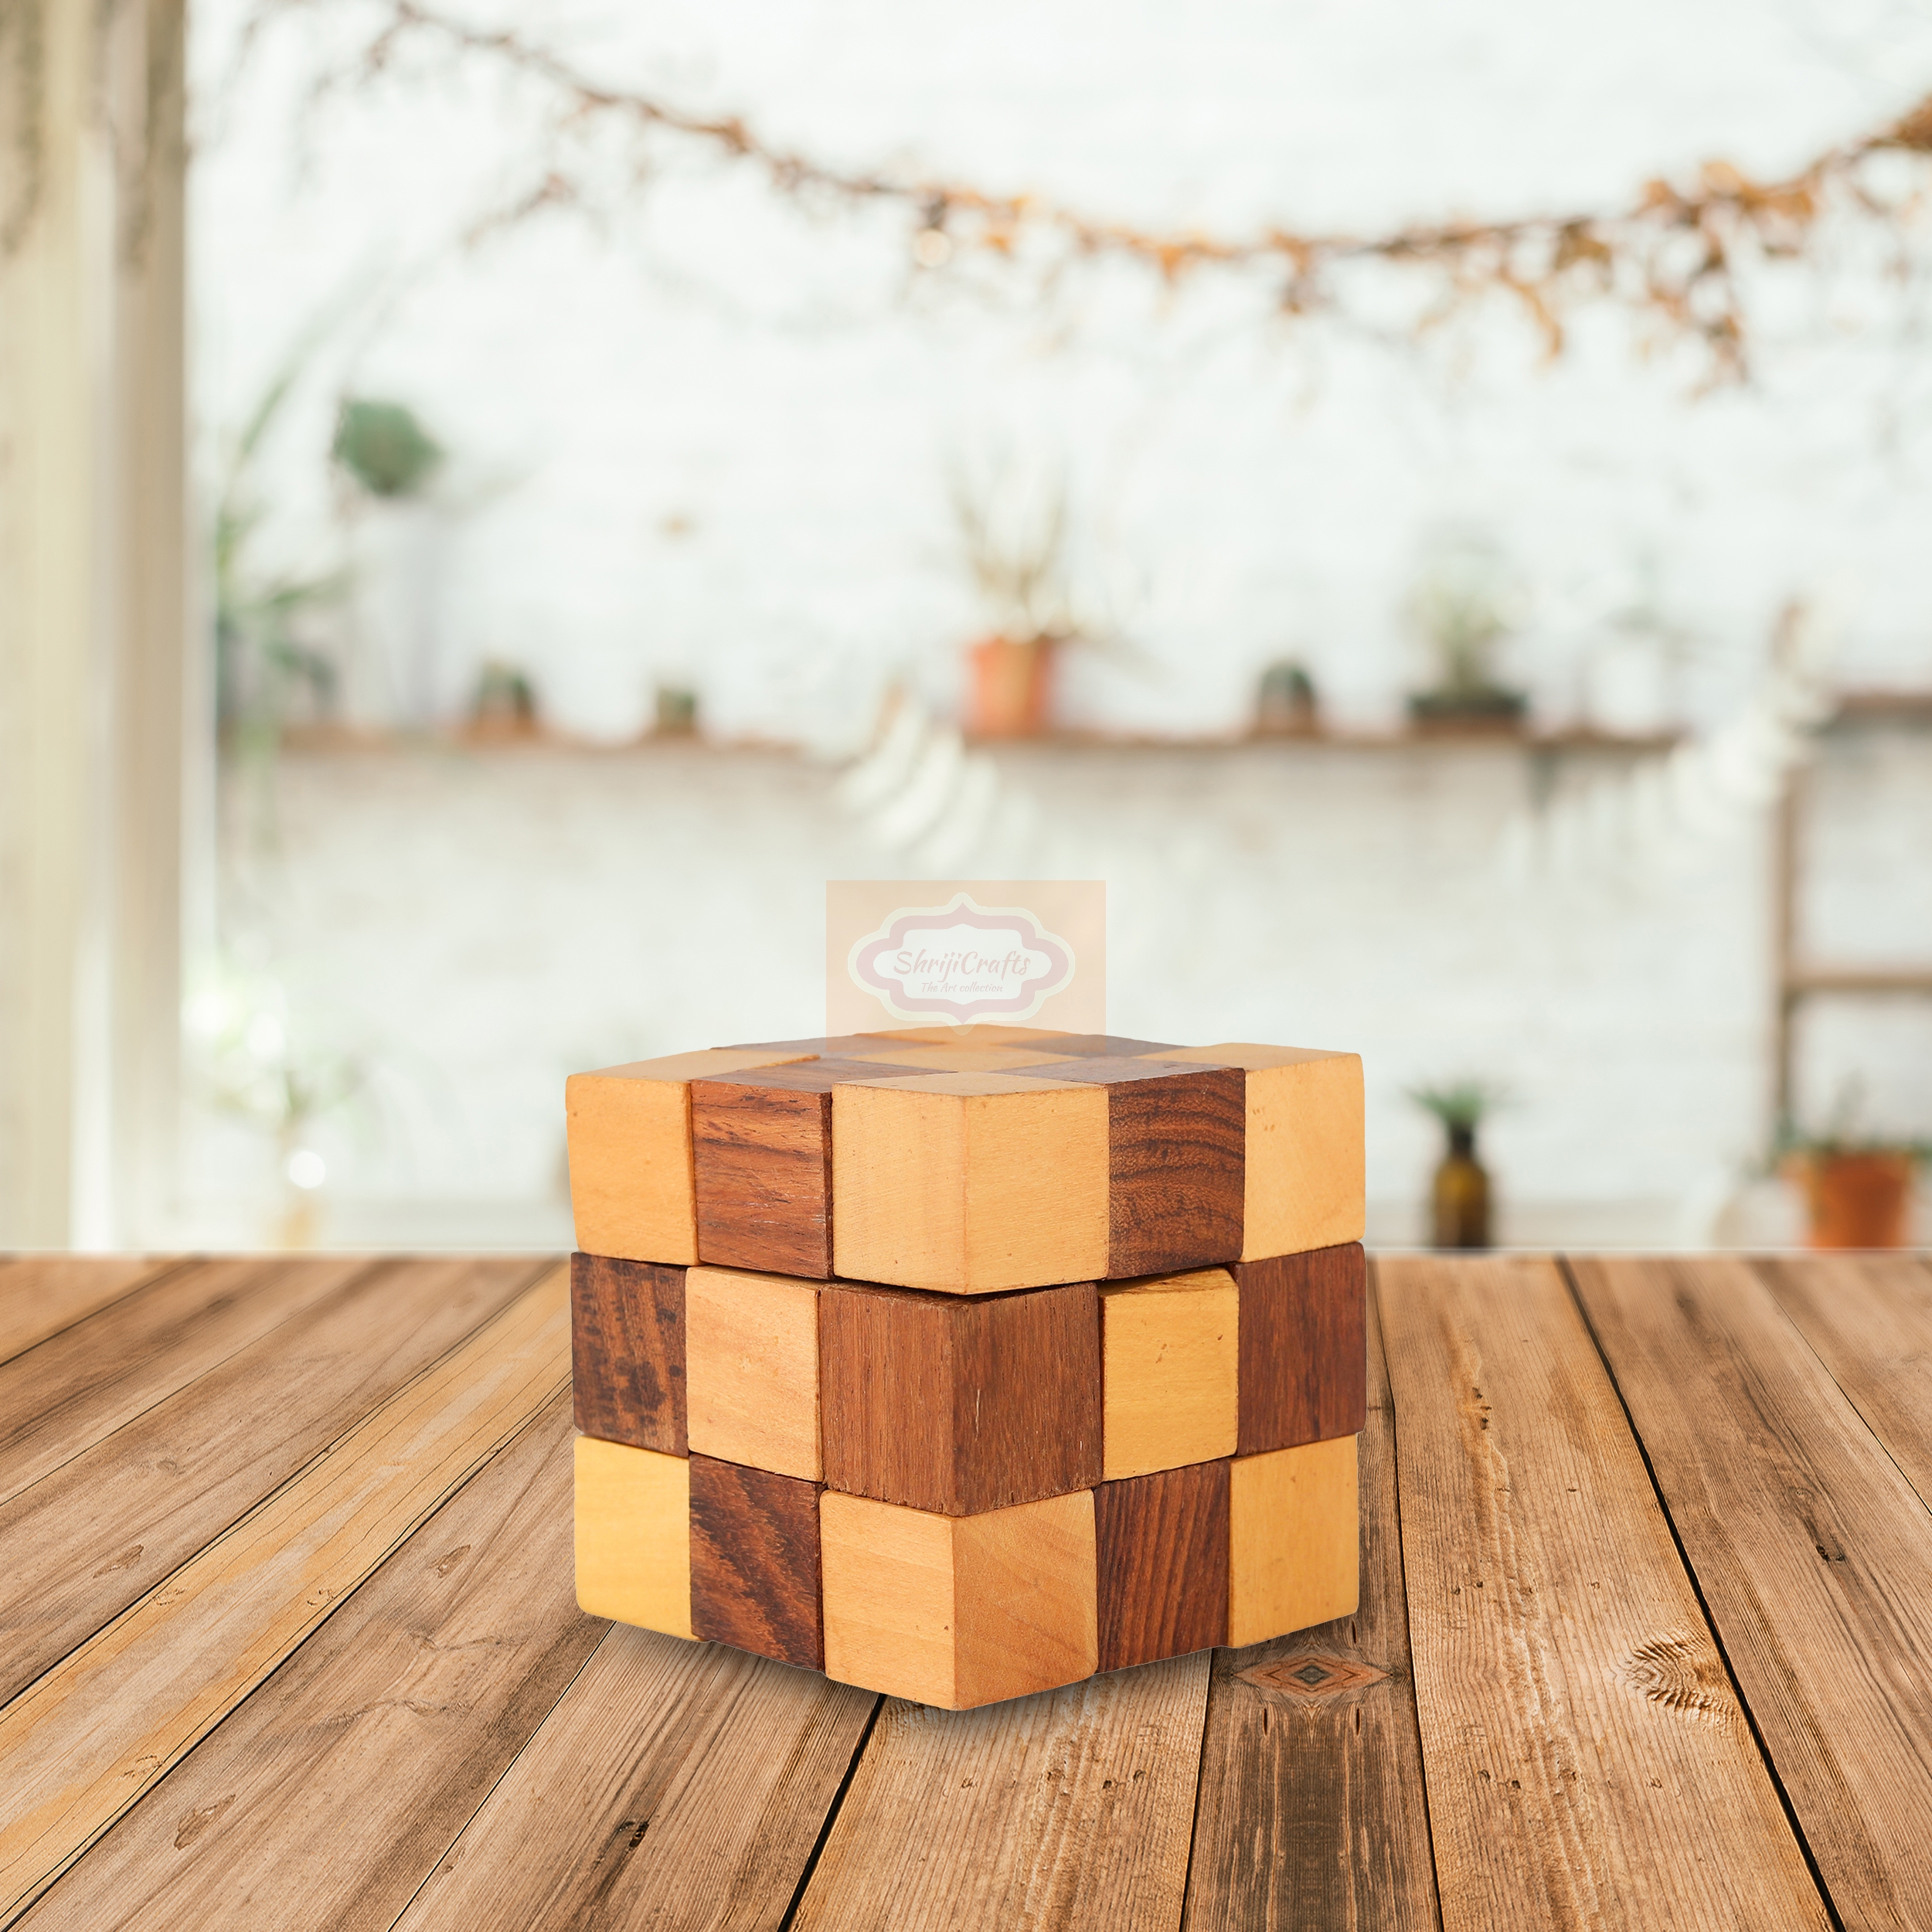 Shrijicrafts | ShrijiCrafts® Wooden IQ Teaser Puzzle Adult Snake Cube Handmade India Unique Gifts for Kids and Adult (2.5x2.5x2.5-inch) 4